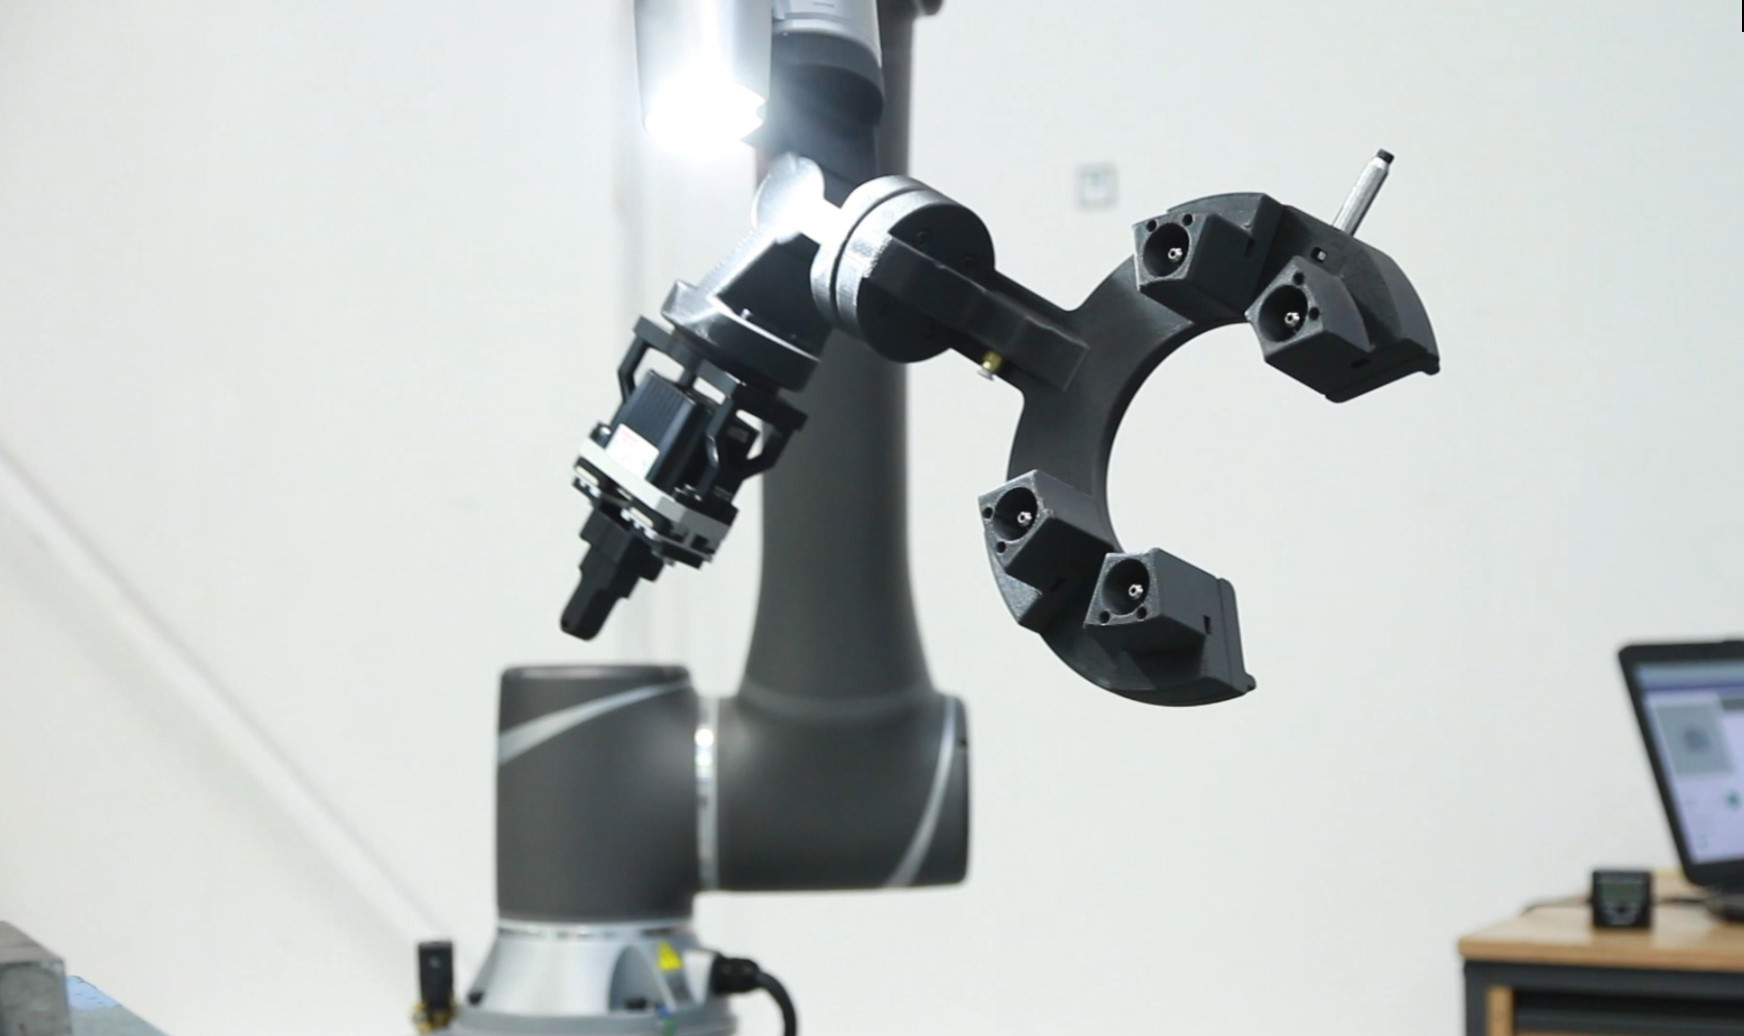 End-of-arm tooling produced on the Fortus 380CF in action on a robotic arm. Photo via SYS.